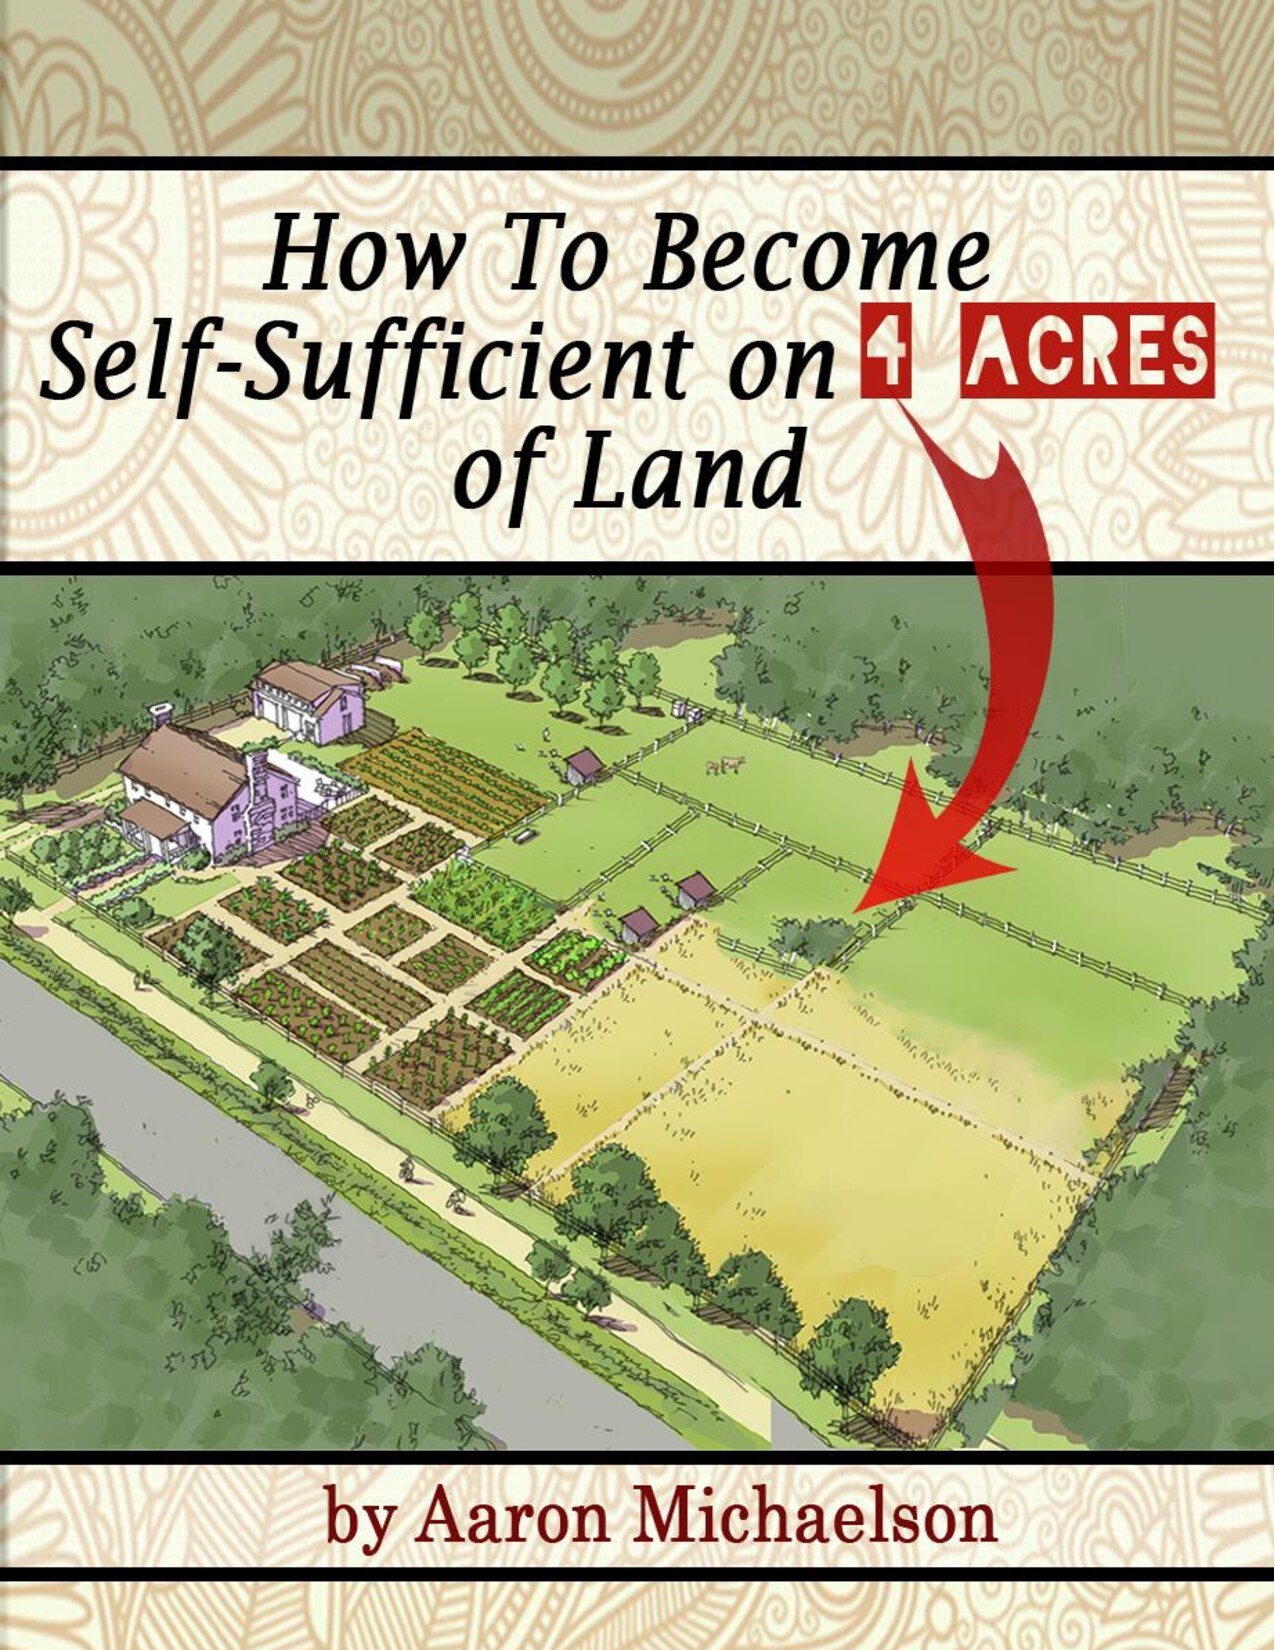 How To Become Self-Sufficient on 4 Acres of Land